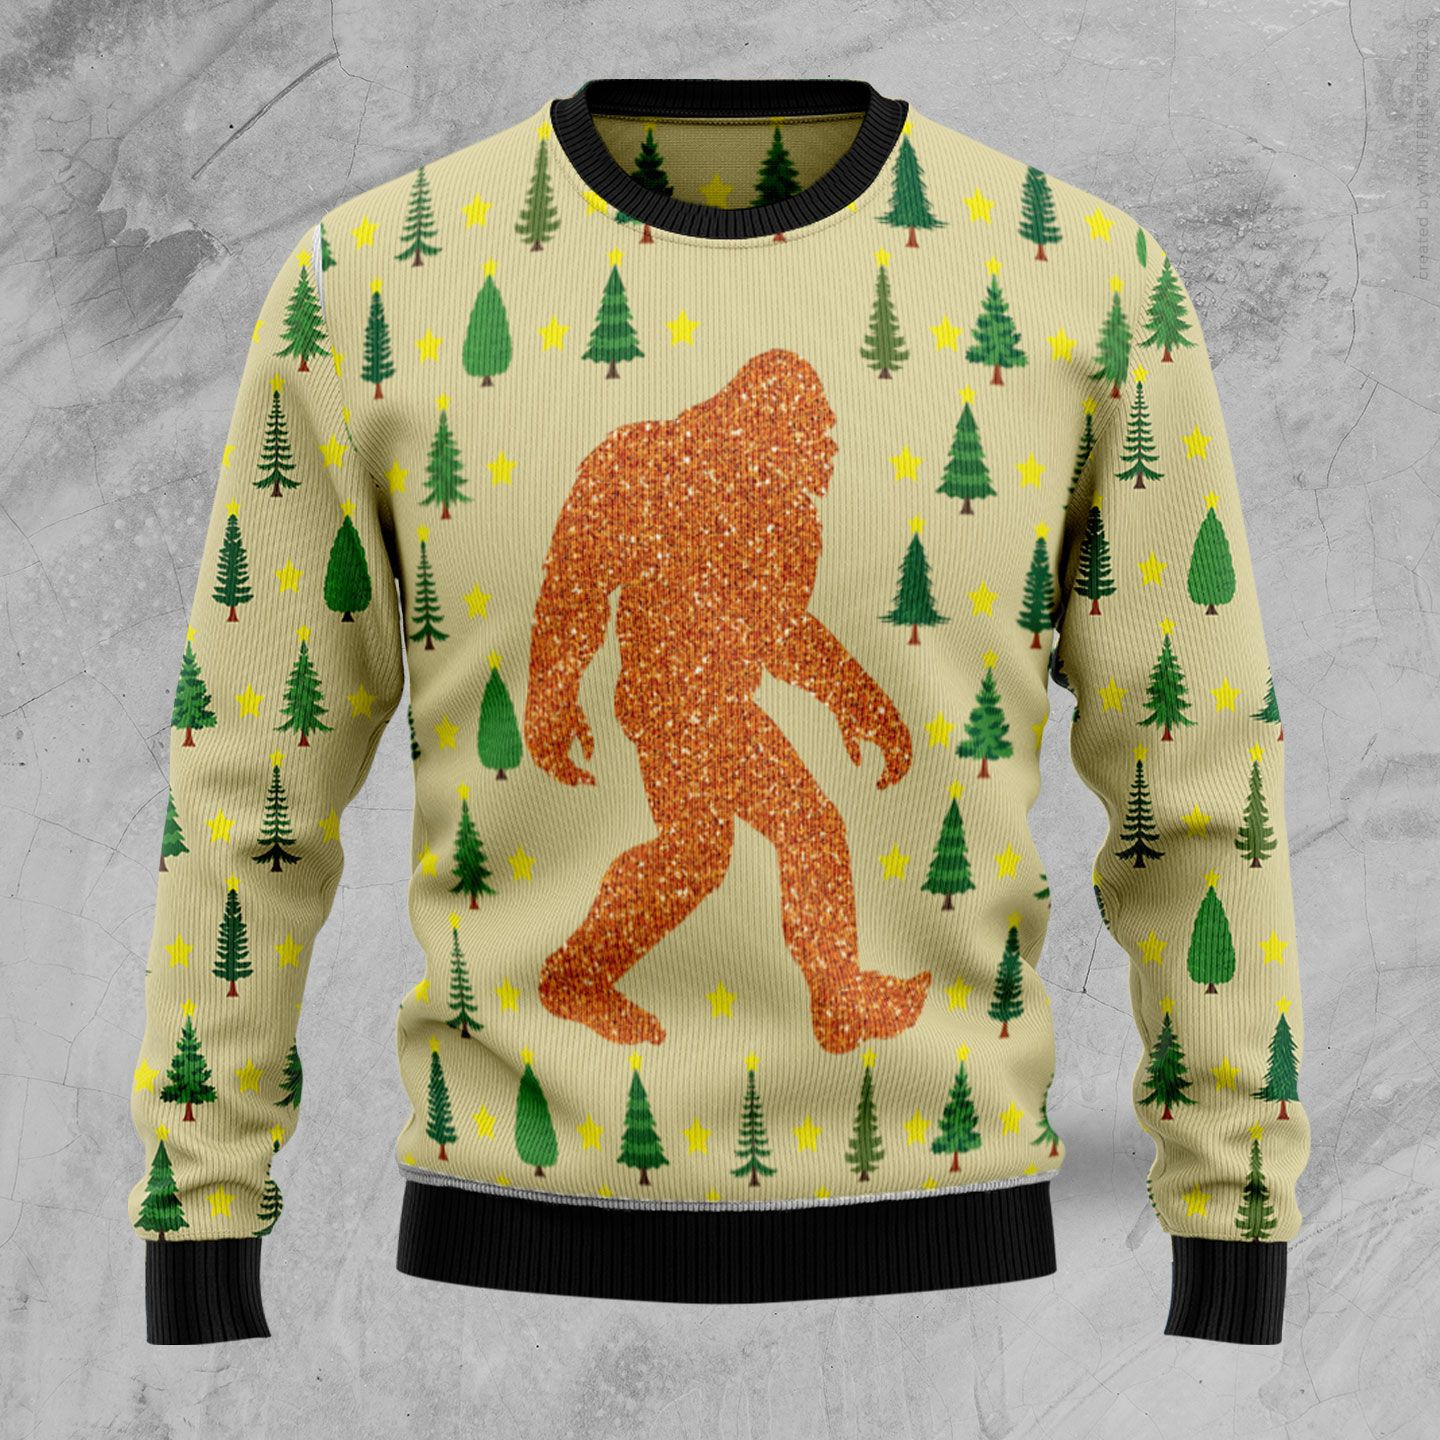 Bigfoot Sasquatch Ugly Christmas Sweater Ugly Sweater For Men Women